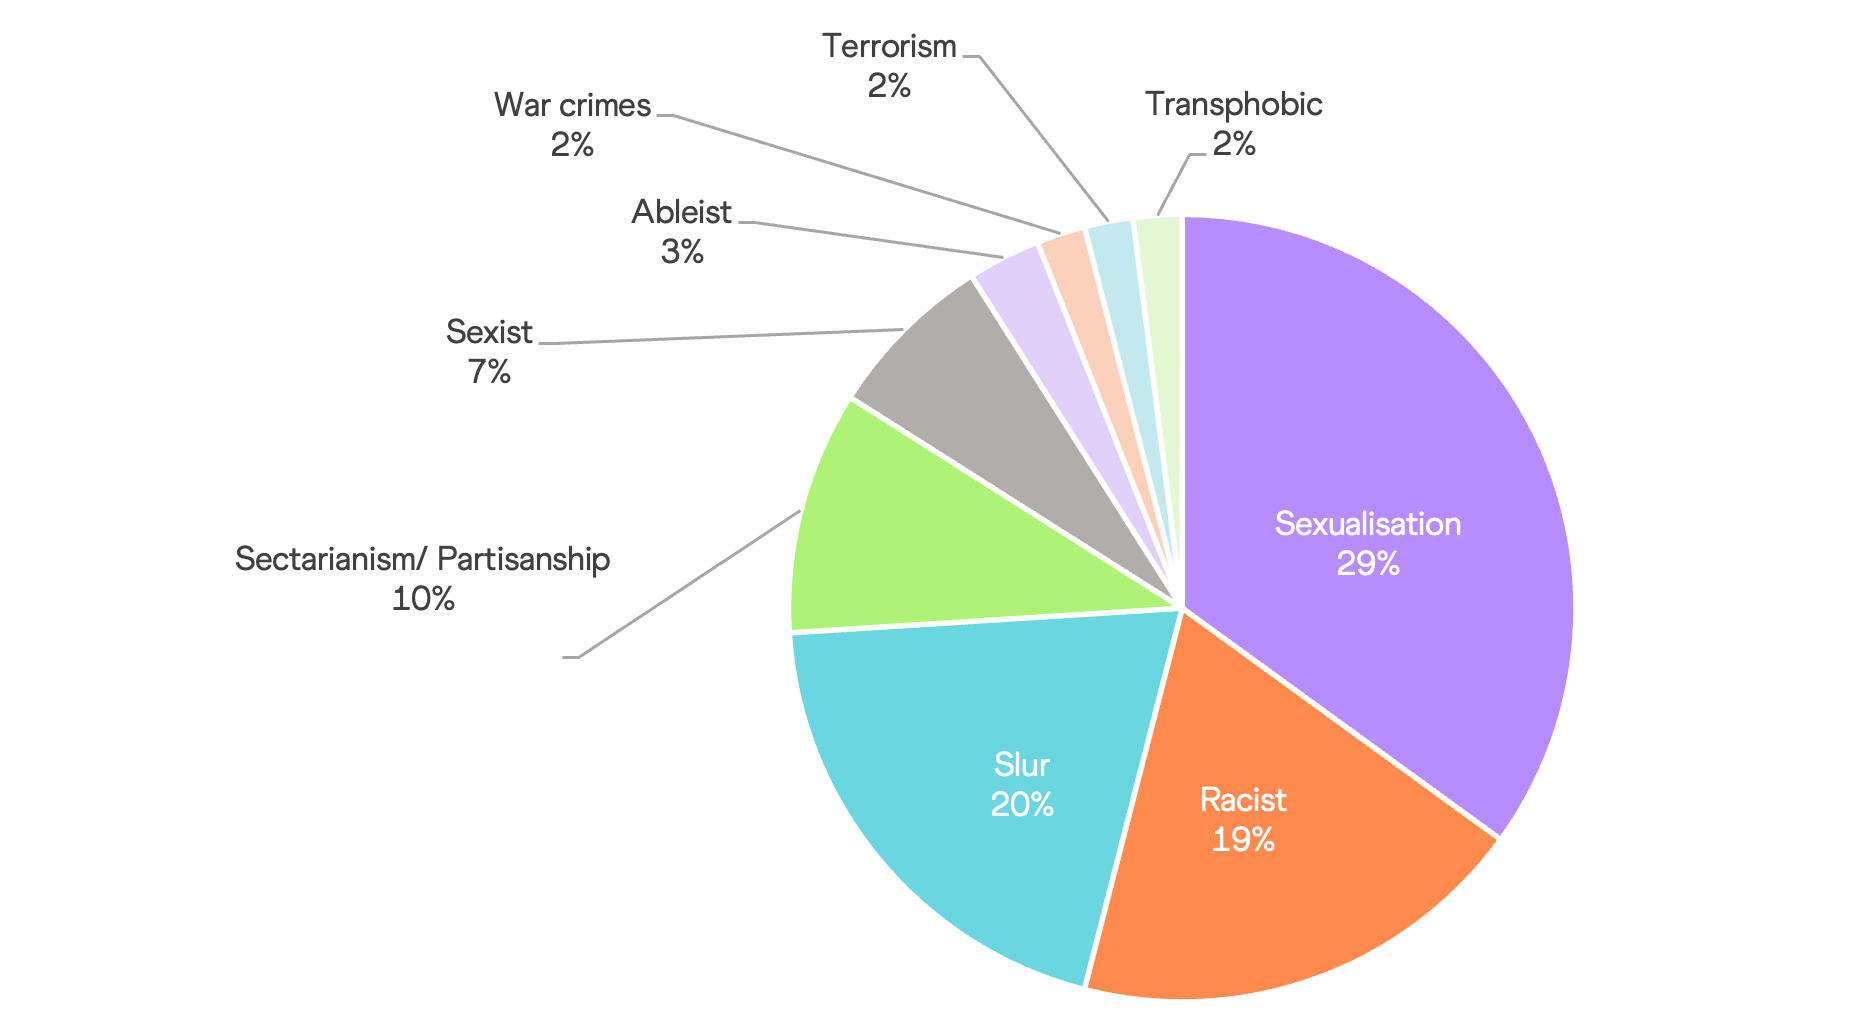 Oregon online abuse study - breakdown of abuse types